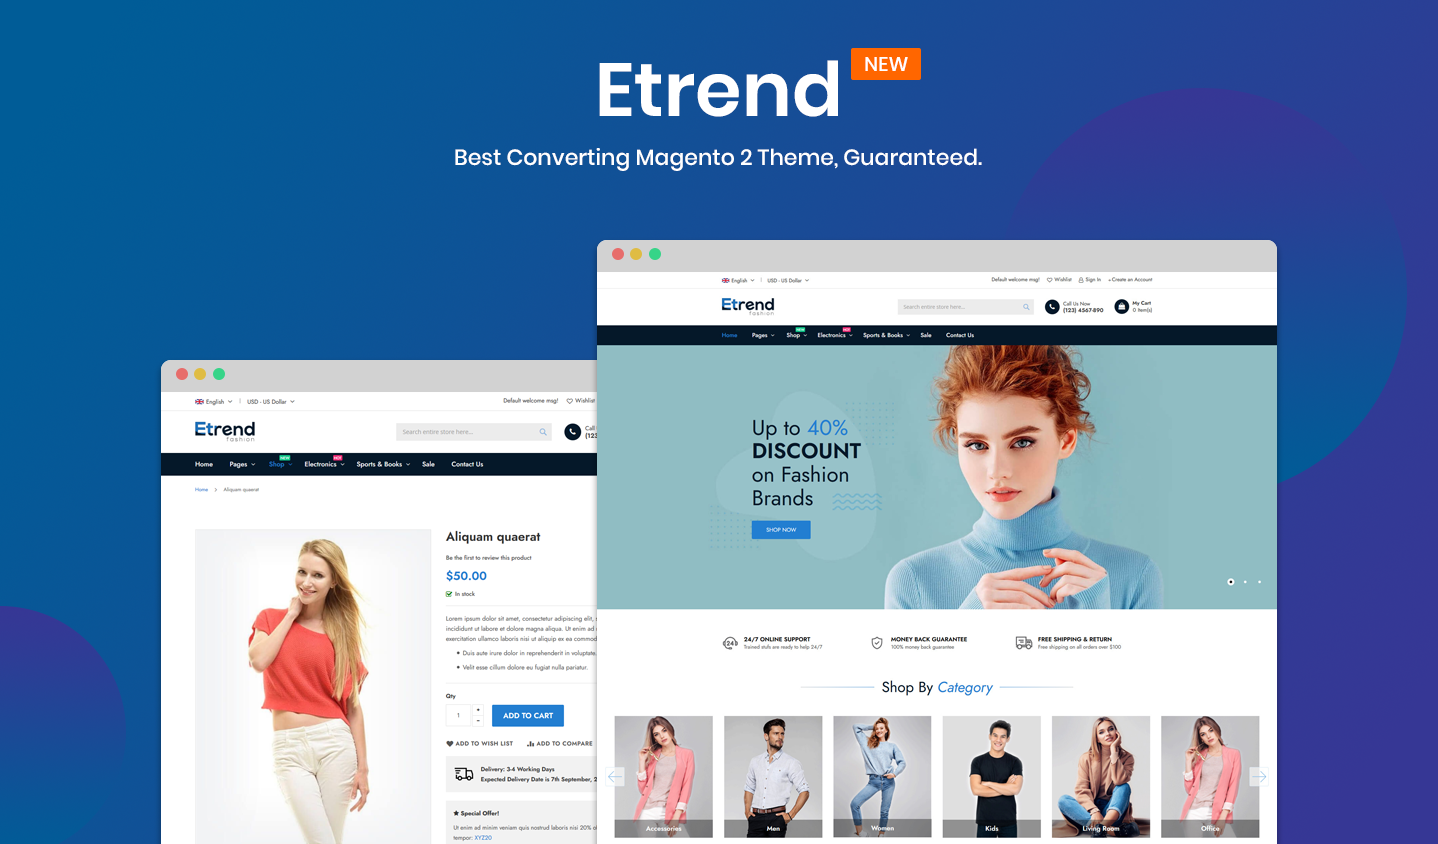 Introducing Etrend - Best Converting Magento 2 Theme | HiddenTechies